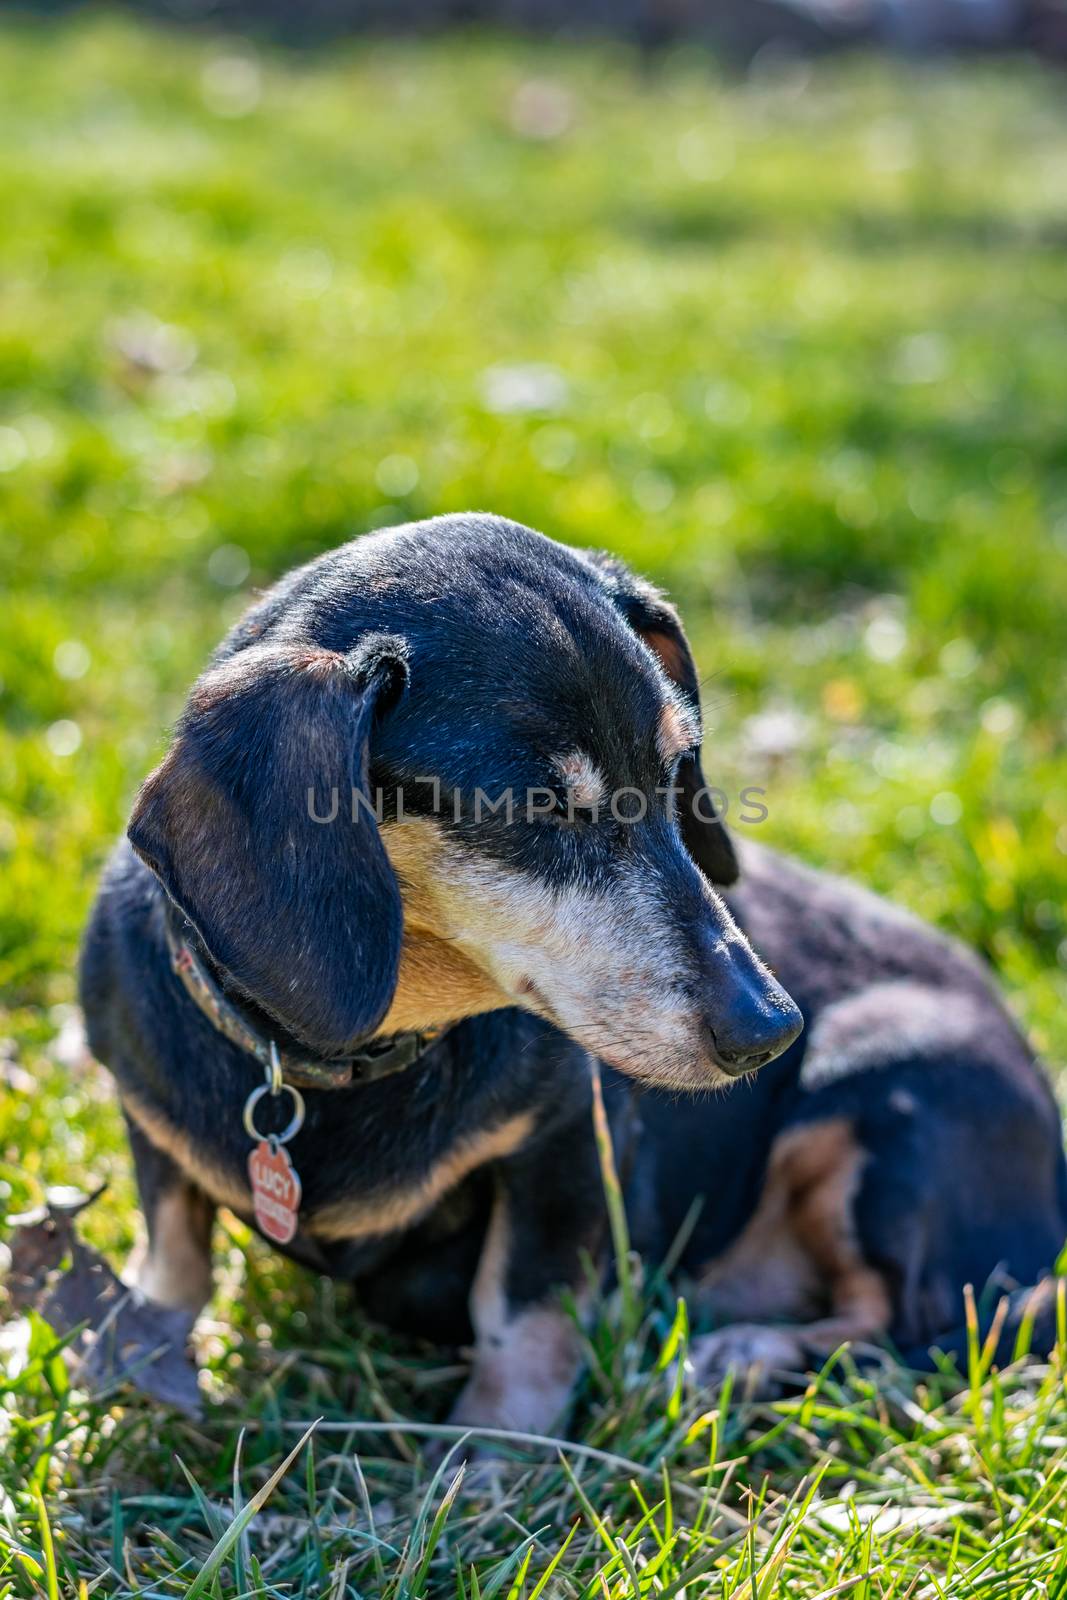 A teckel dog with black fur standing in the grass